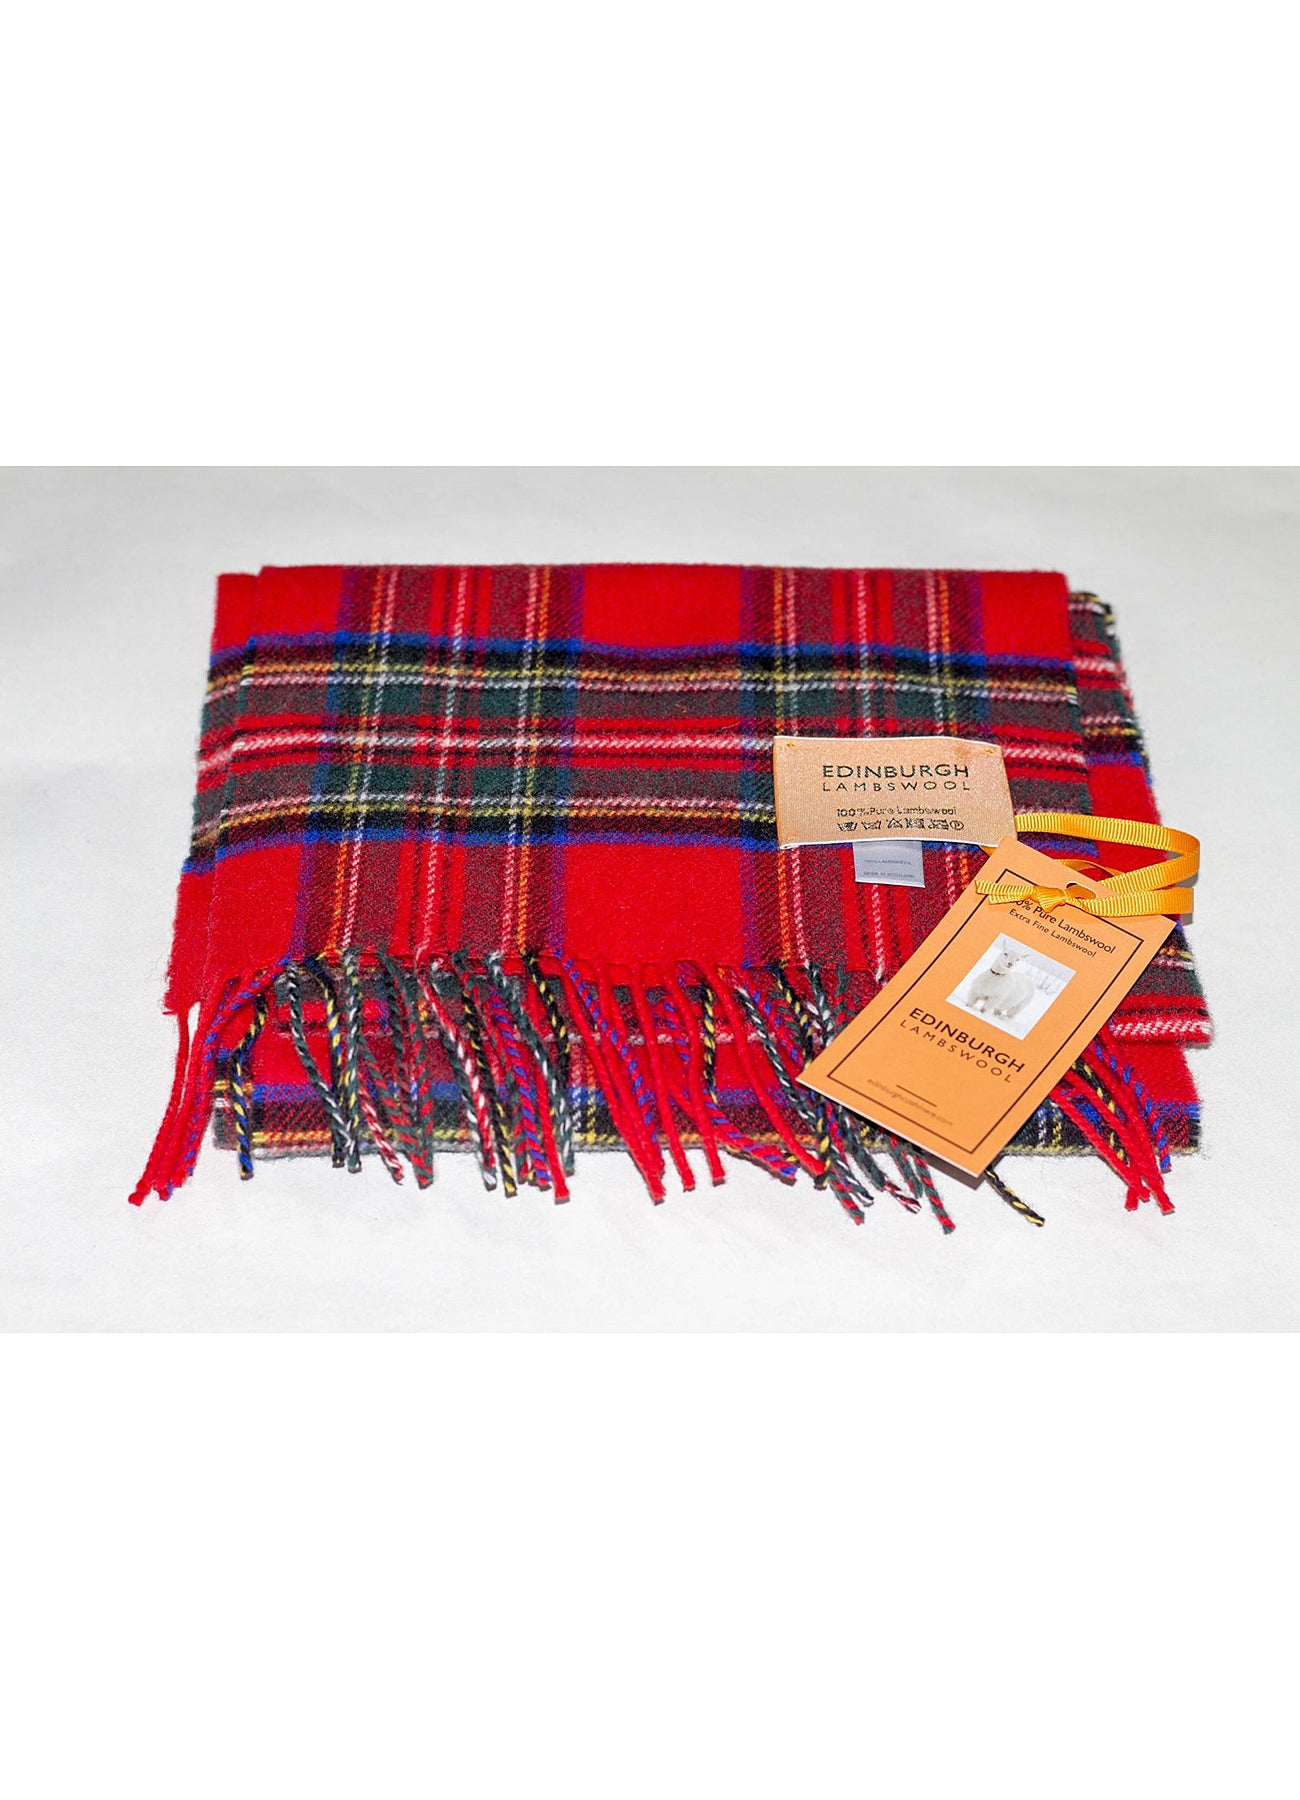 Royal Stewart Scarf - Made in Scotland 100% Pure Lambswool